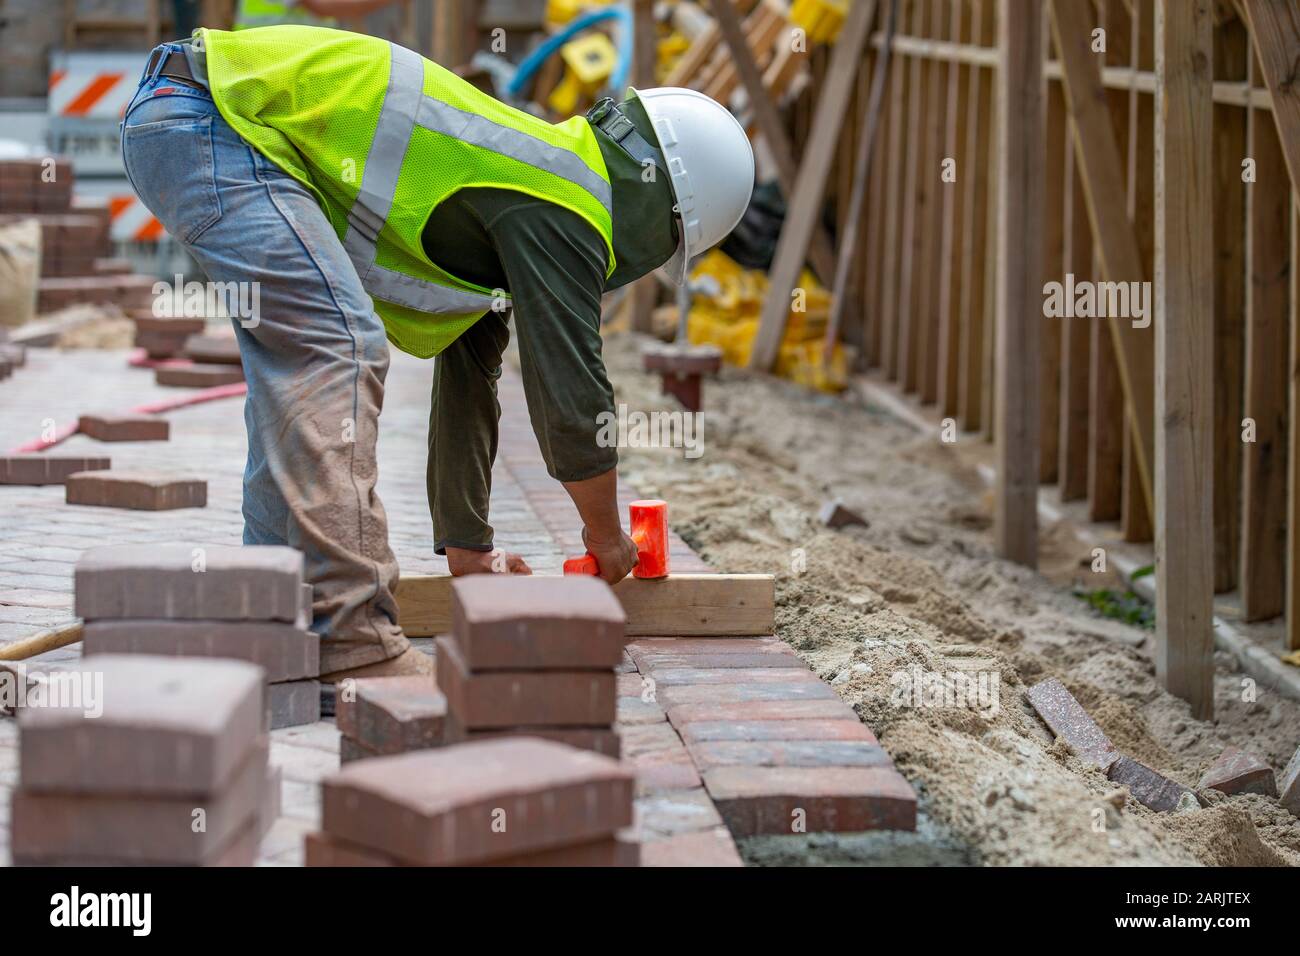 Brick Layer, paver tamping on a piece of wood to adjust the hight of a payed paver brick Stock Photo